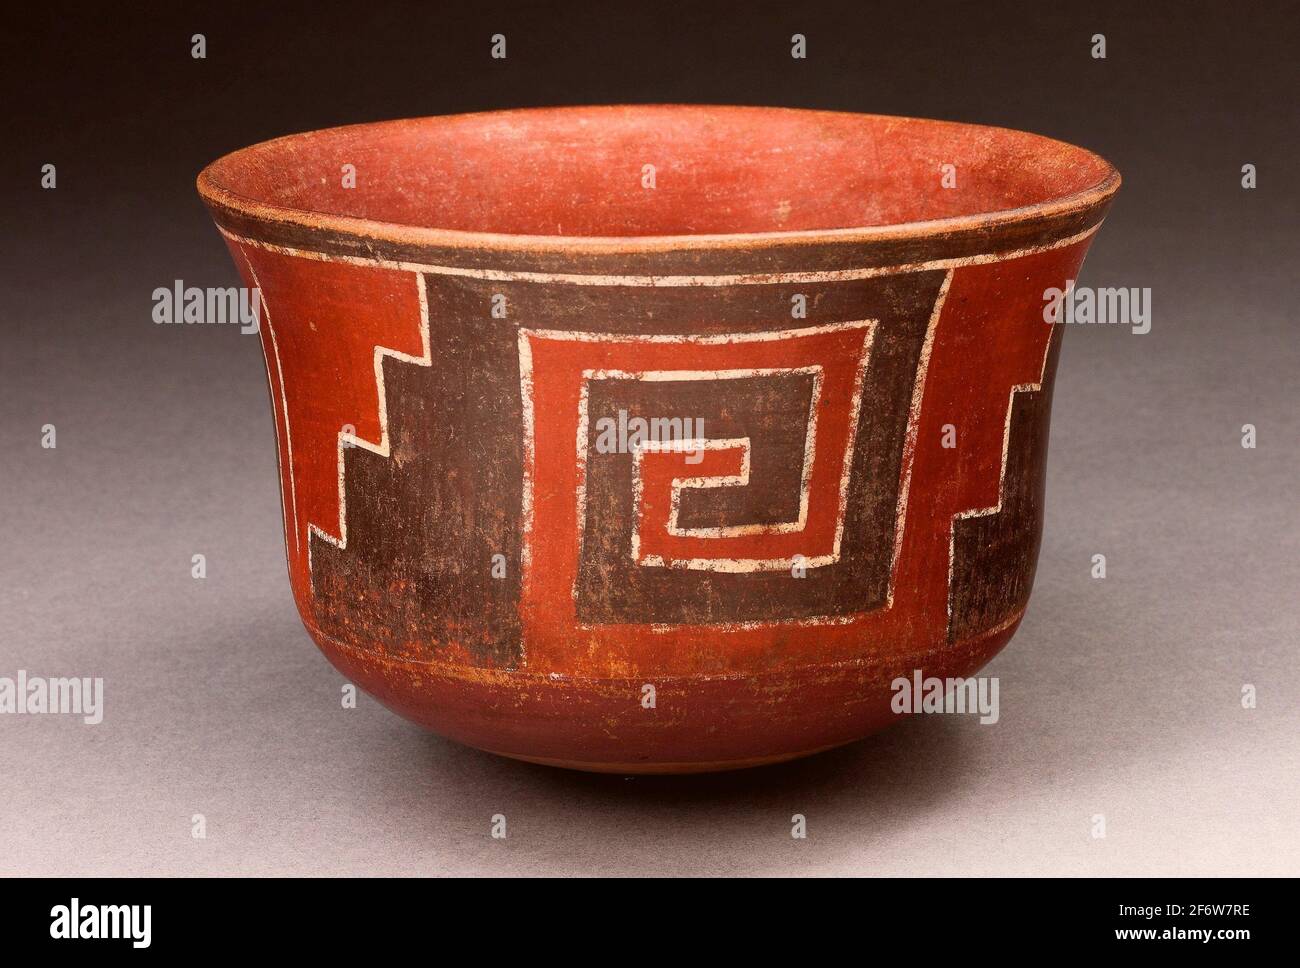 Author: Nazca. Cup with Stepped-Fret Motif - 180 B.C./A.D. 500 - Nazca South coast, Peru. Ceramic and pigment. 180 BC - 500 AD. Nazca Valley. Stock Photo